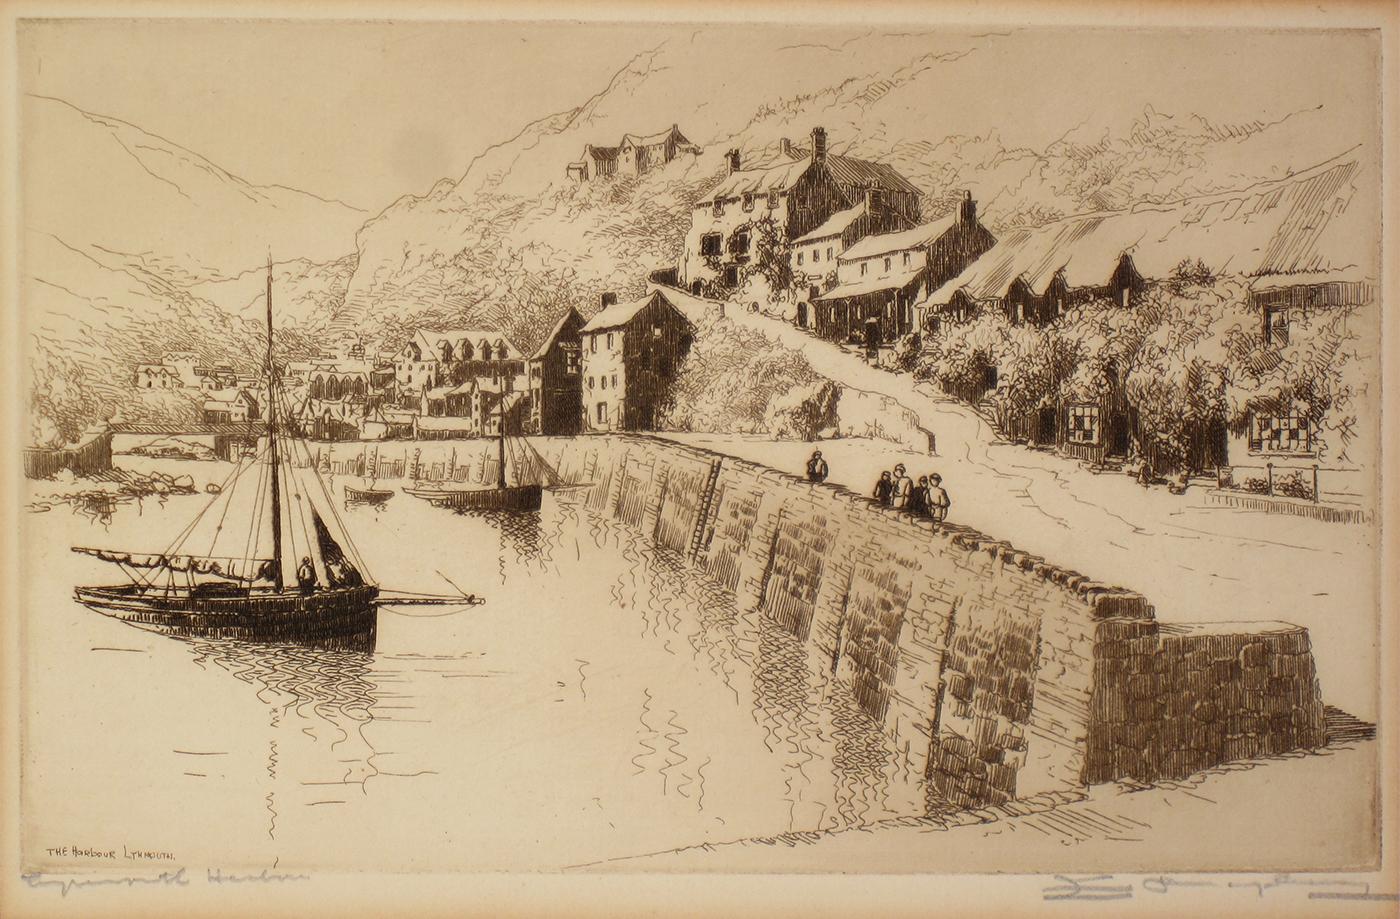 Edgar James Maybery Landscape Print - The Harbour Lynmouth. Antique Print 1920s